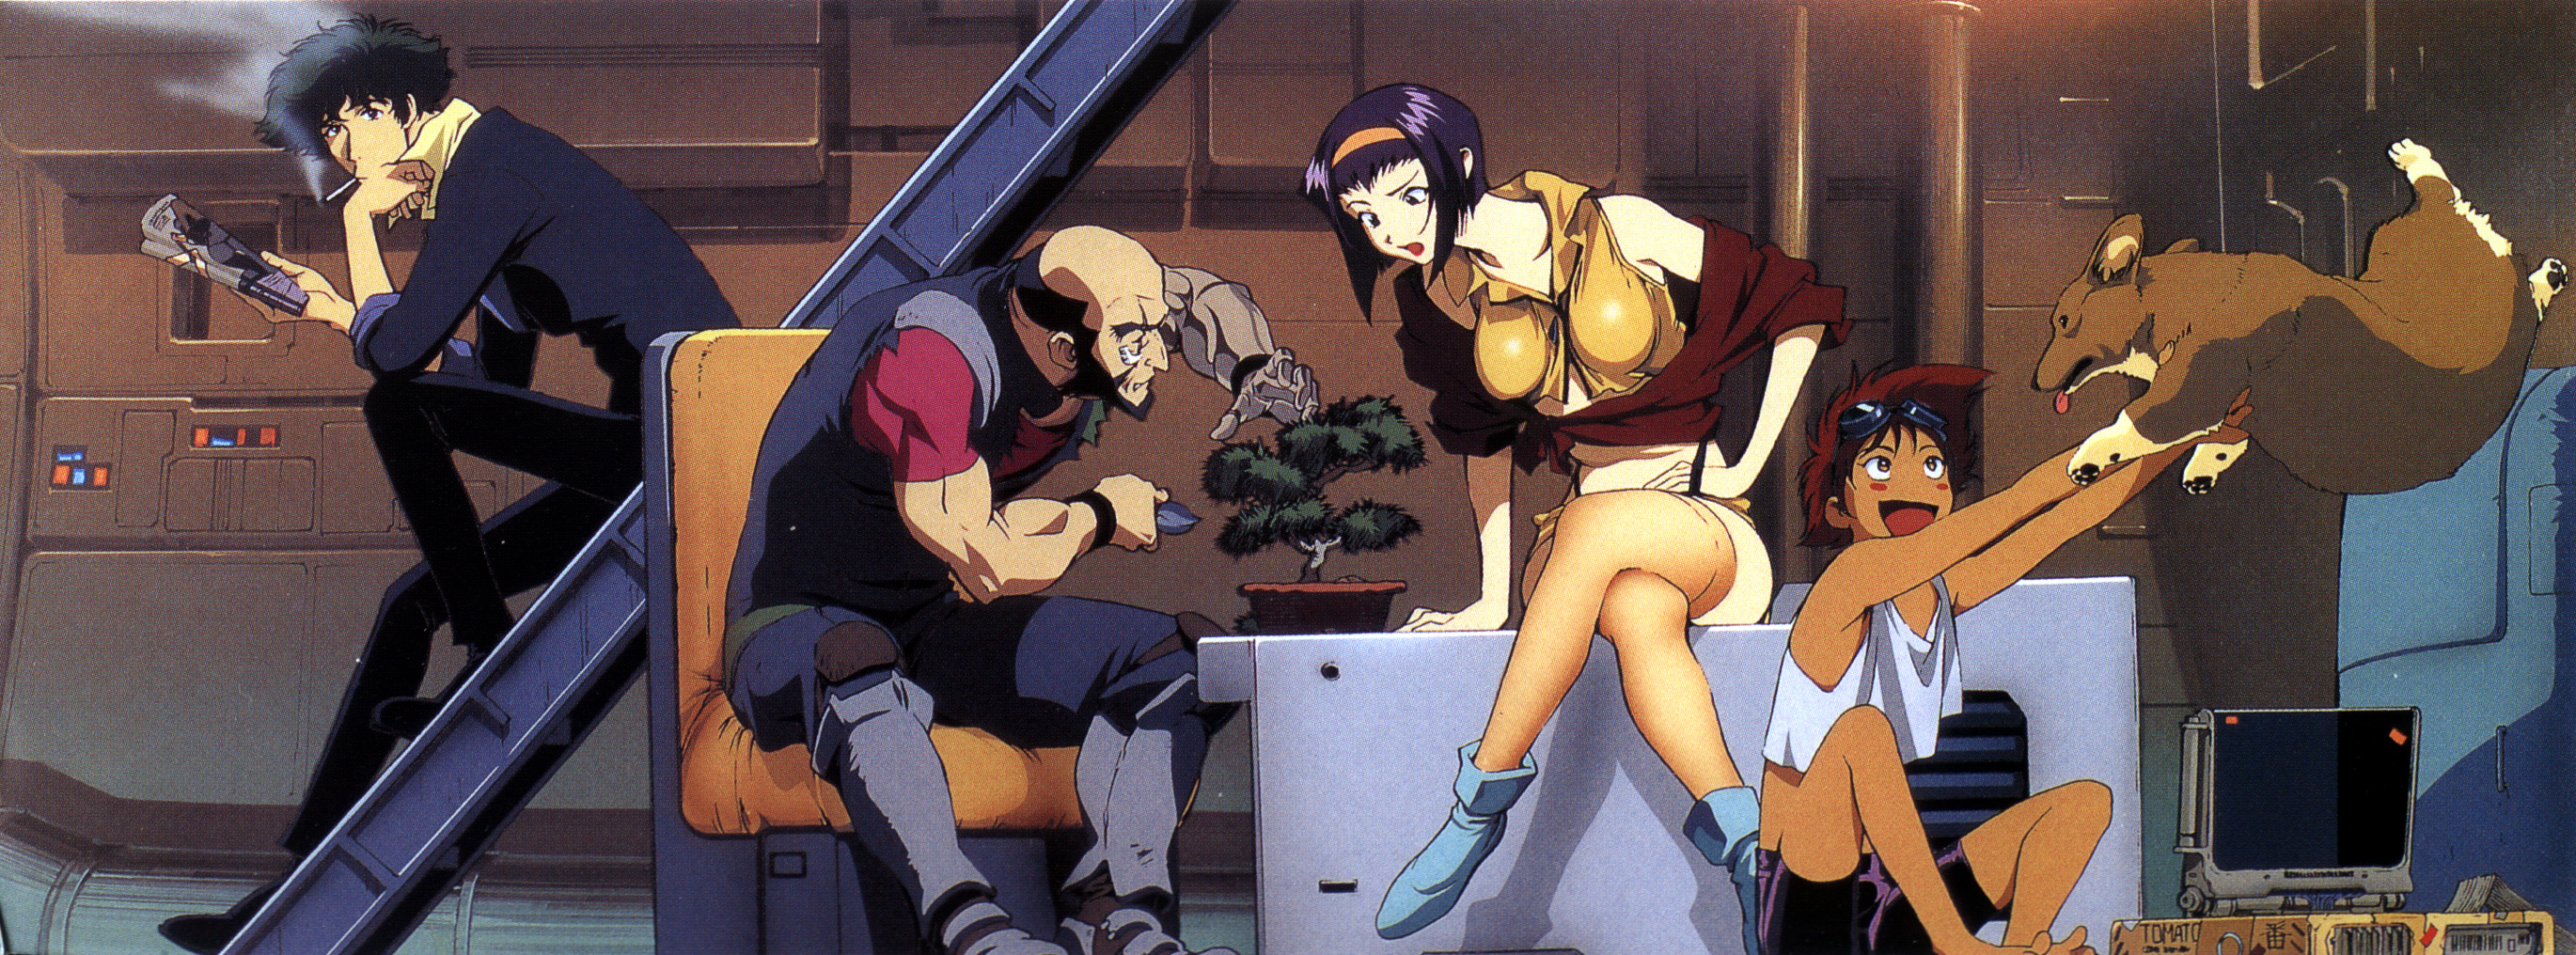 4 Ein (Cowboy Bebop) HD Wallpapers | Backgrounds - Wallpaper Abyss